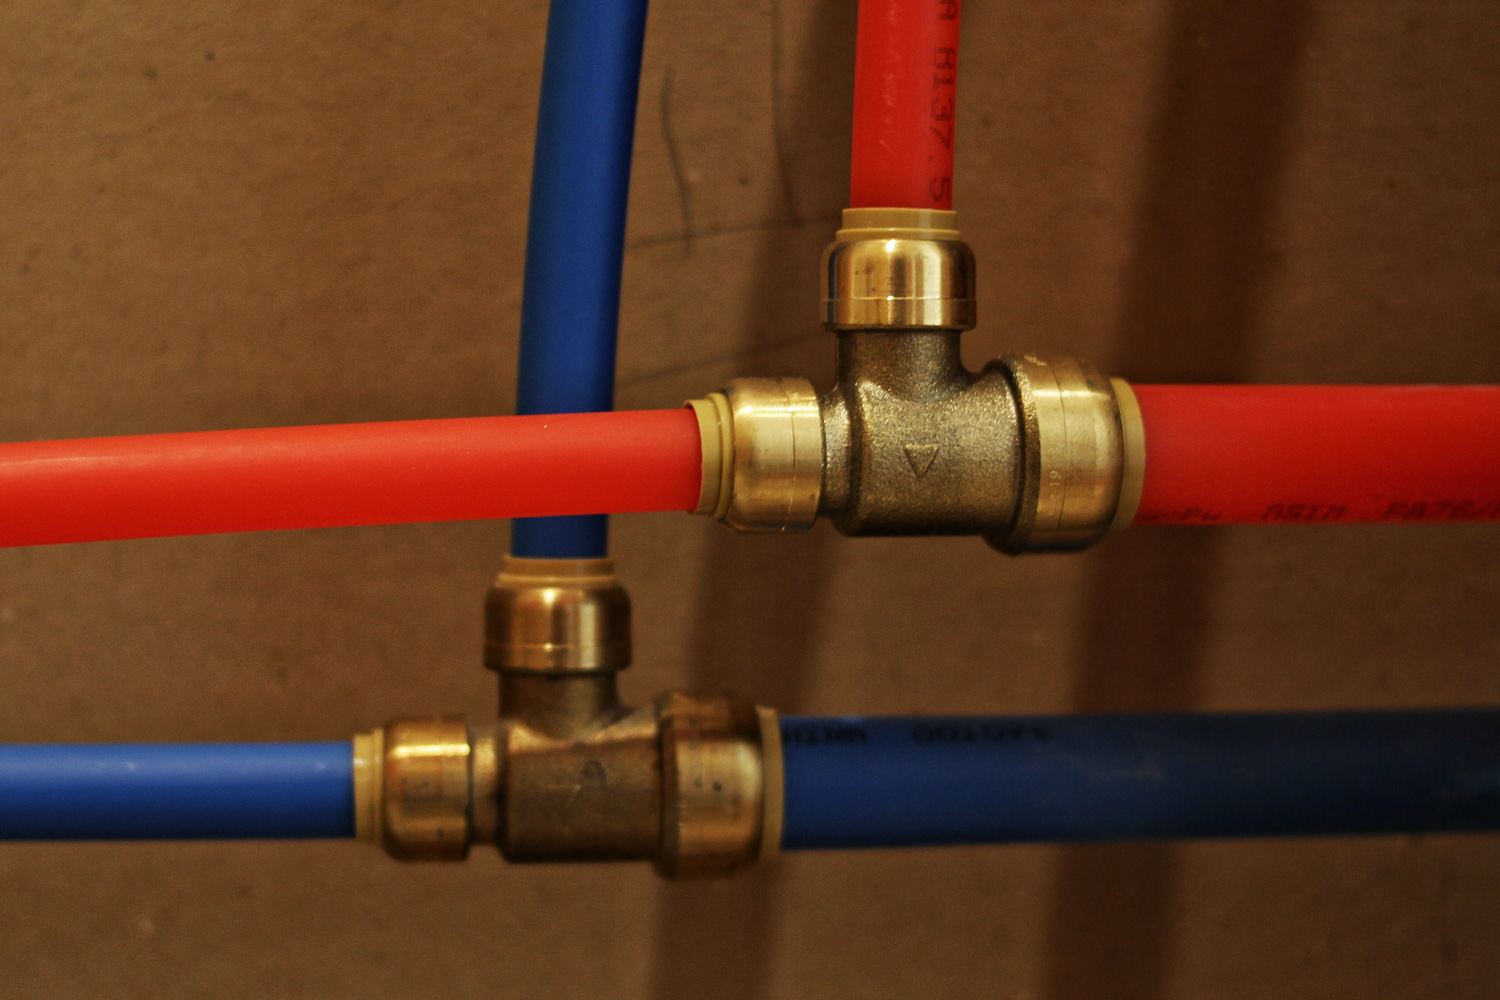 Sharkbite fittings with red and blue PEX pipe.